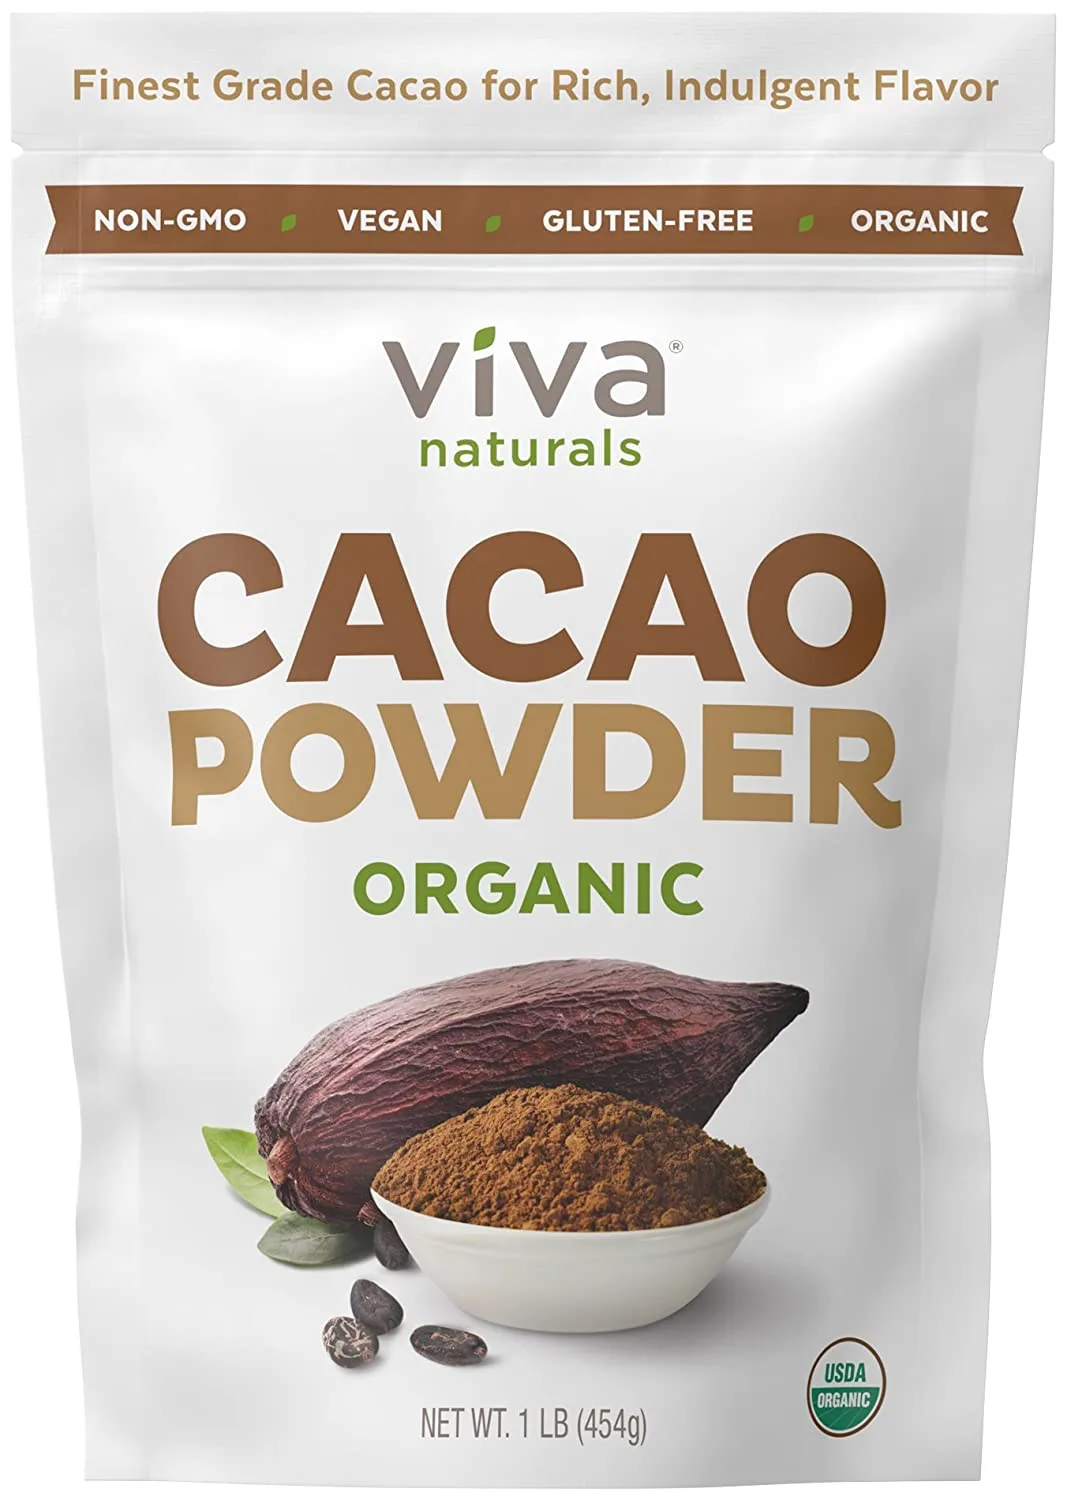 Viva Naturals #1 Best Selling Certified Organic Cacao Powder